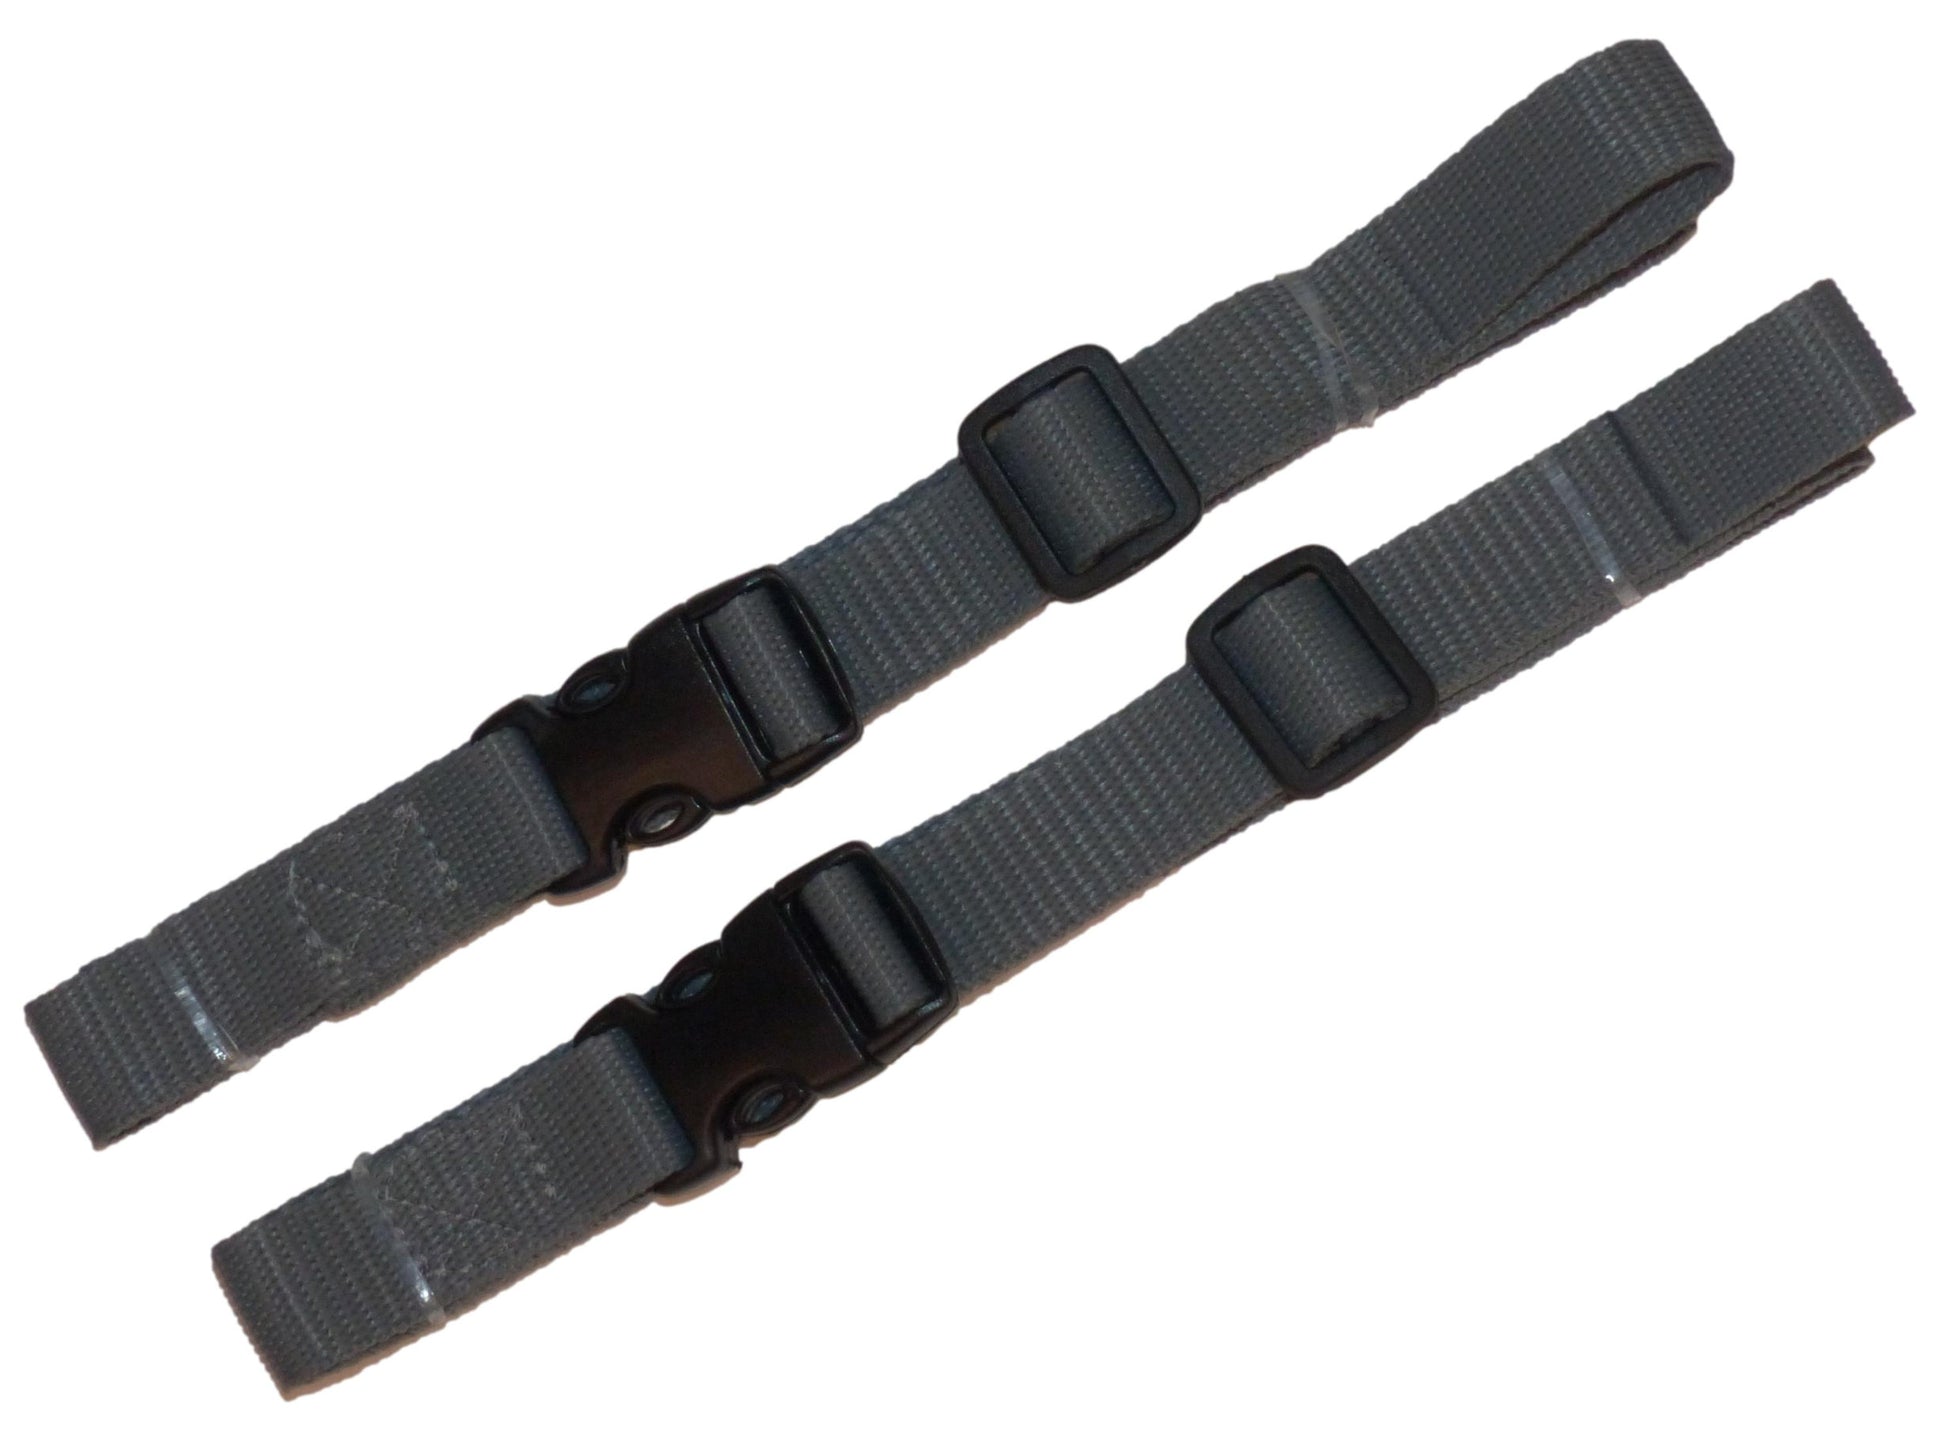 Benristraps 19mm Webbing Strap with Quick Release Buckle (Pair